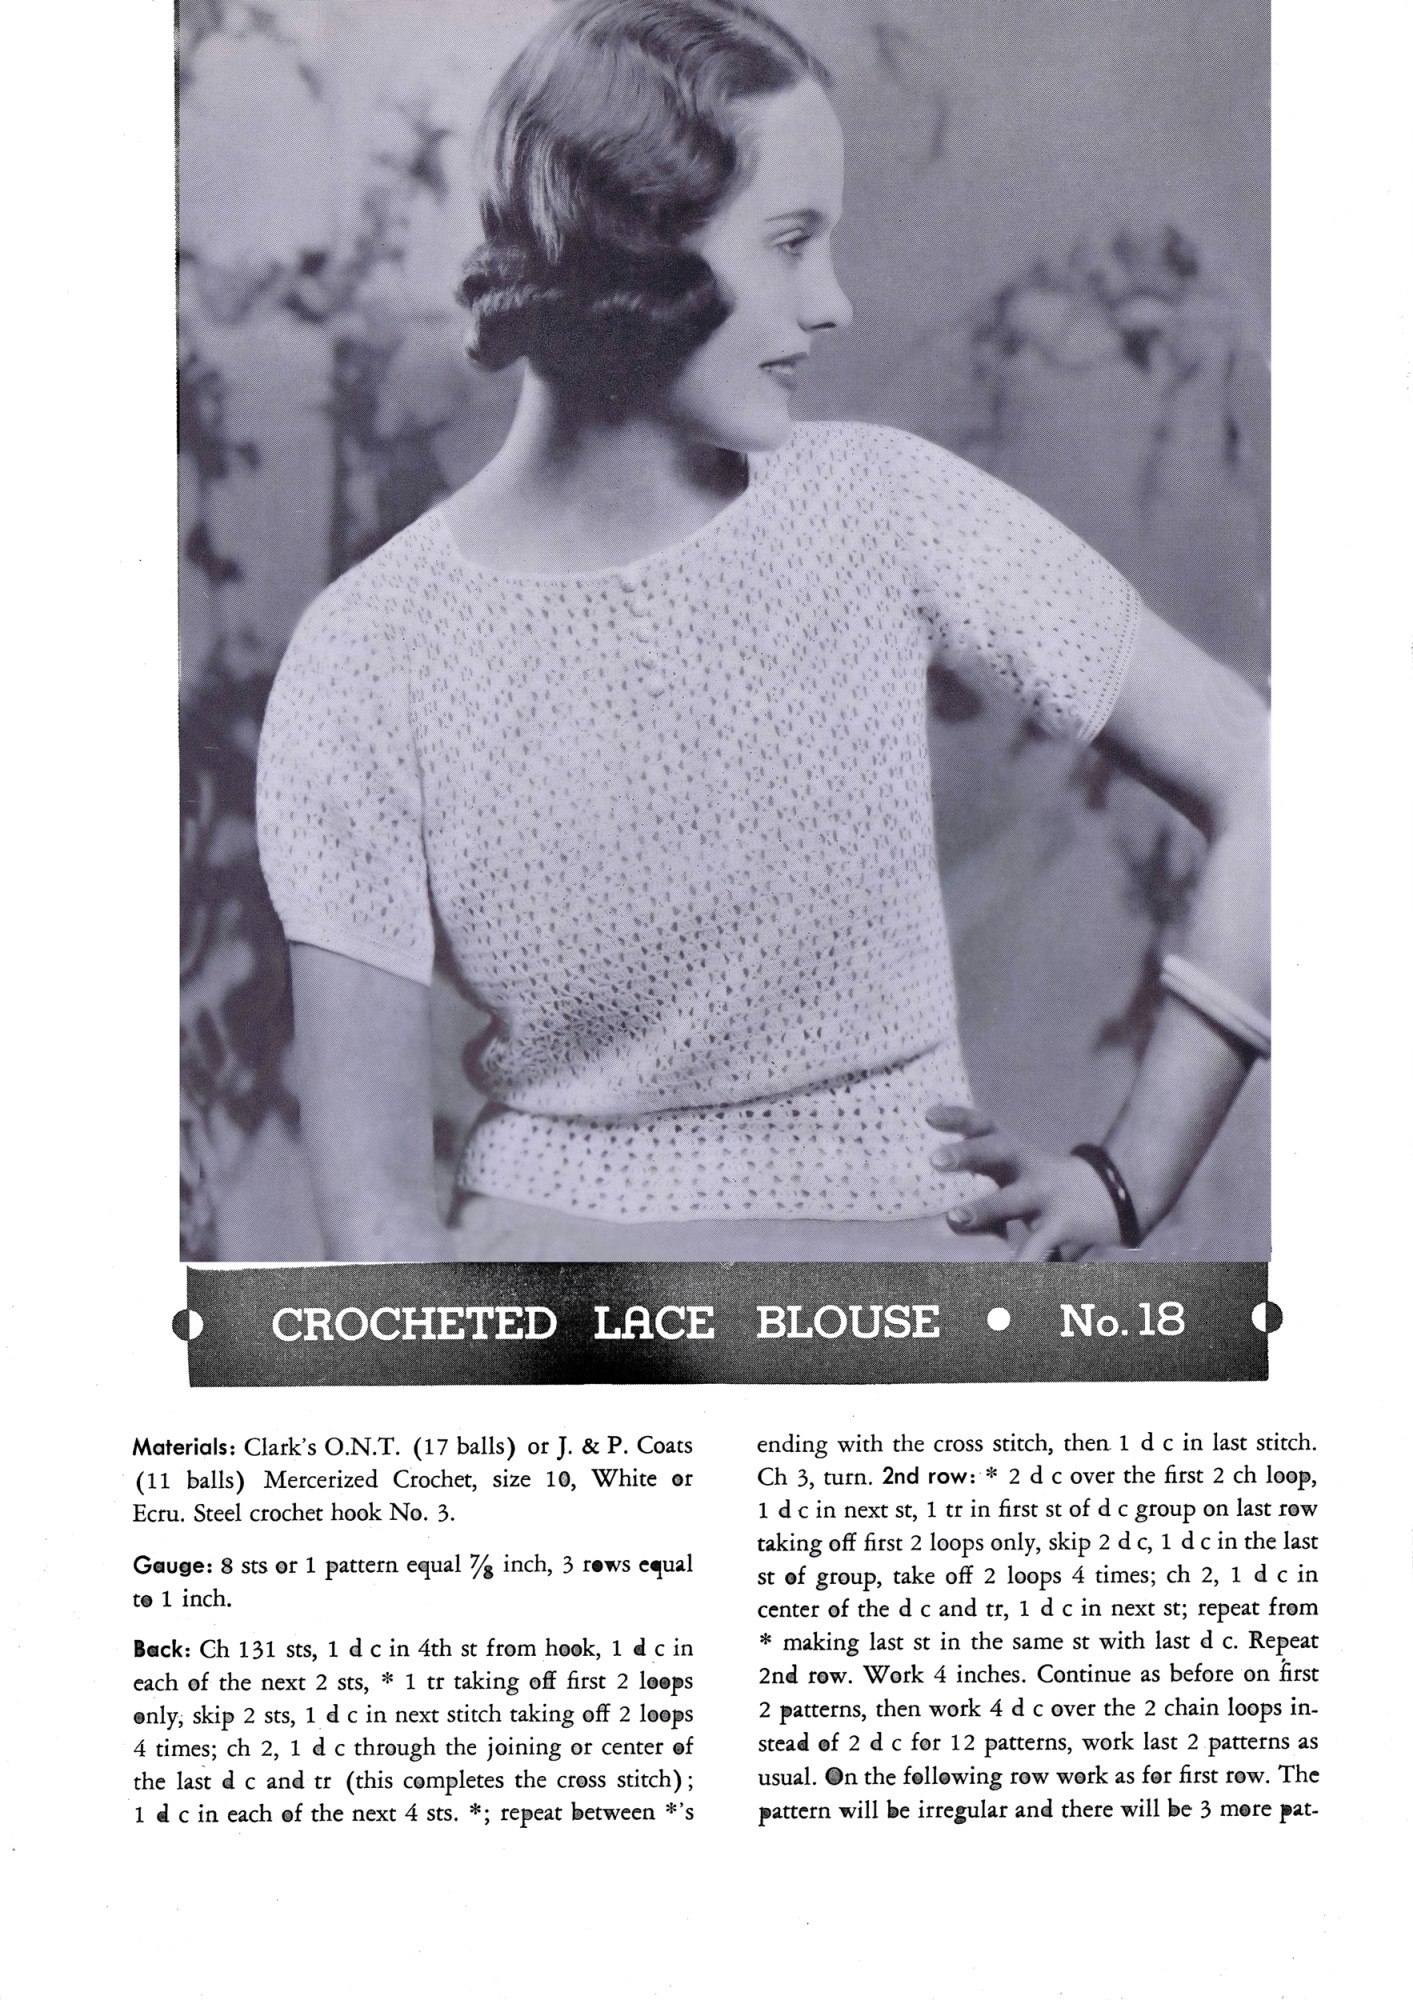 Crocheted Lace Blouse Selected Designs for Crochet